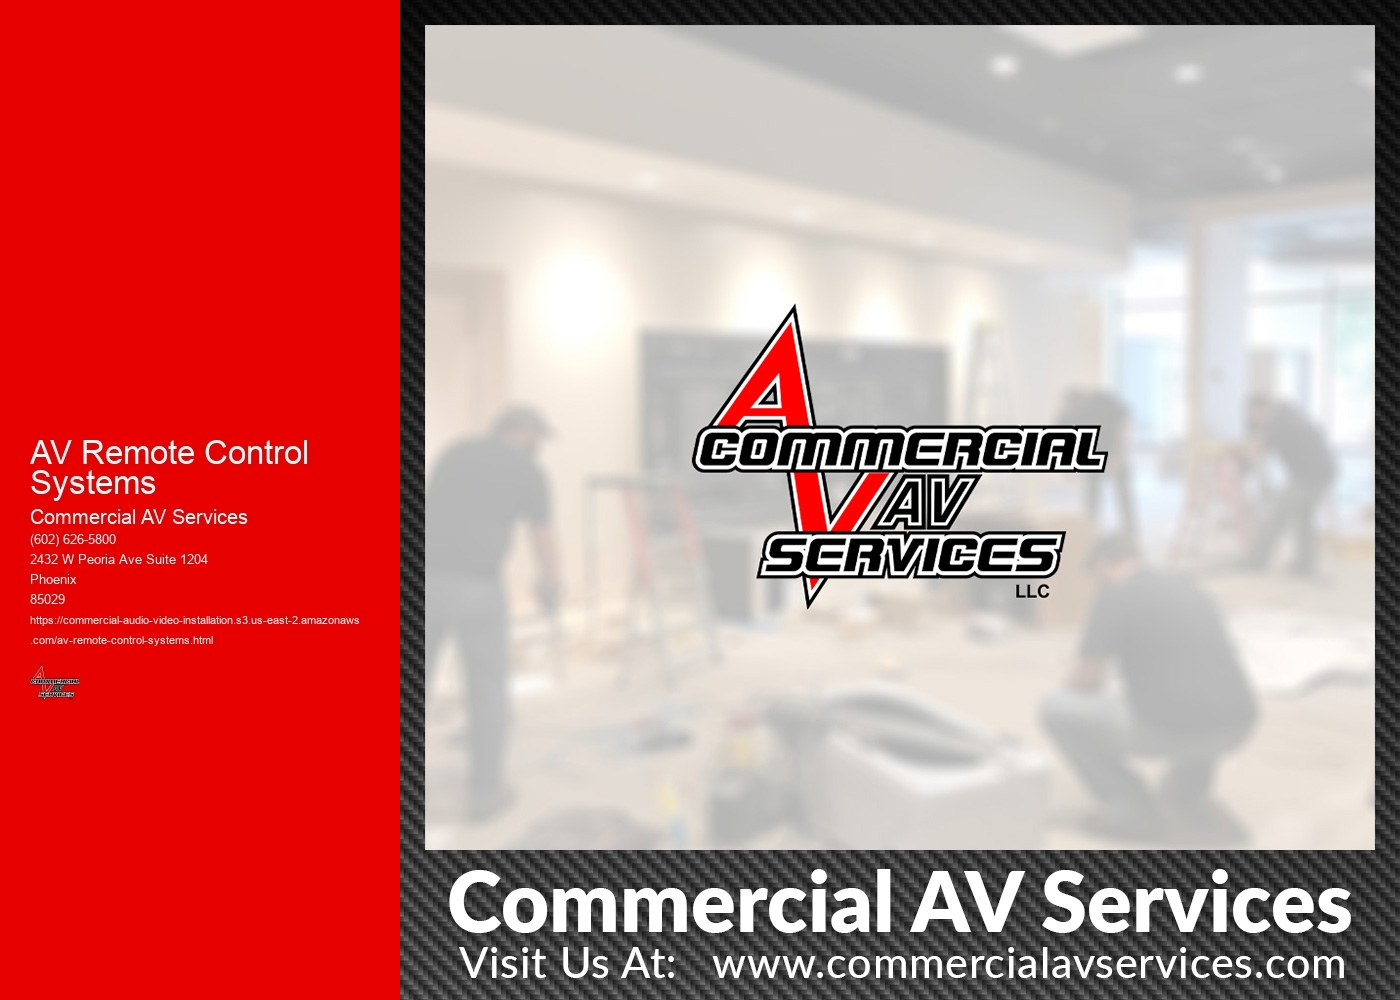 How can AV remote control systems be programmed and customized to suit individual preferences?